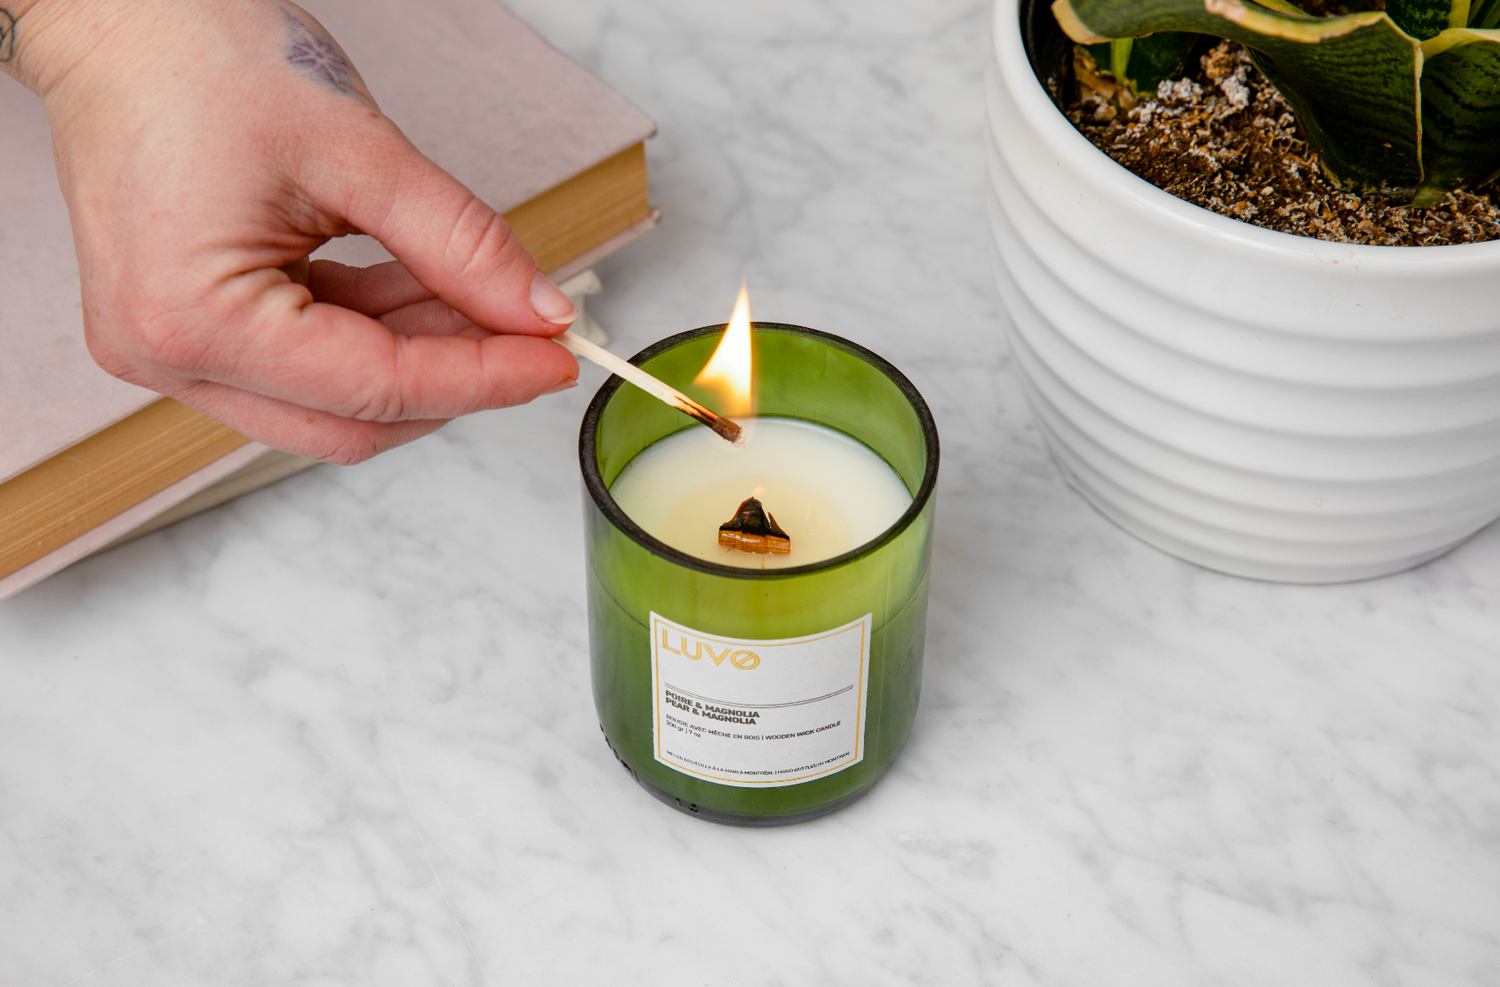 What is the best wick for a scented candle?